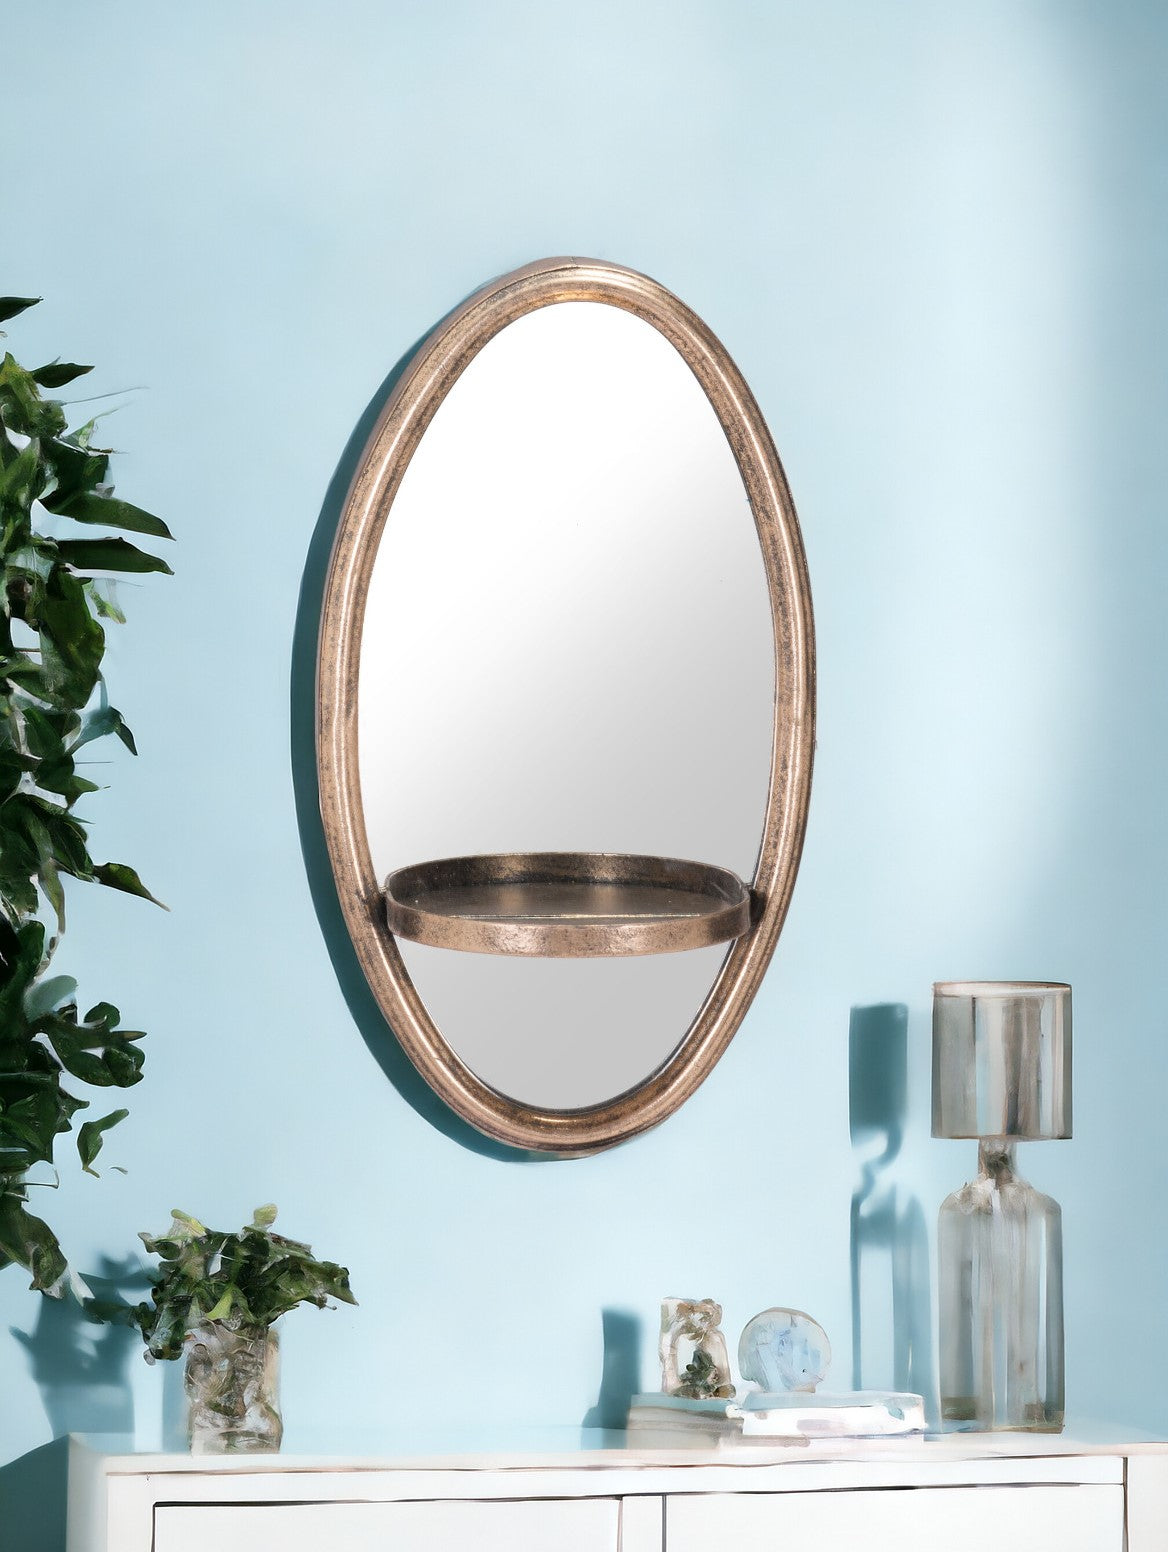 13" Gold Oval Accent Framed Mirror